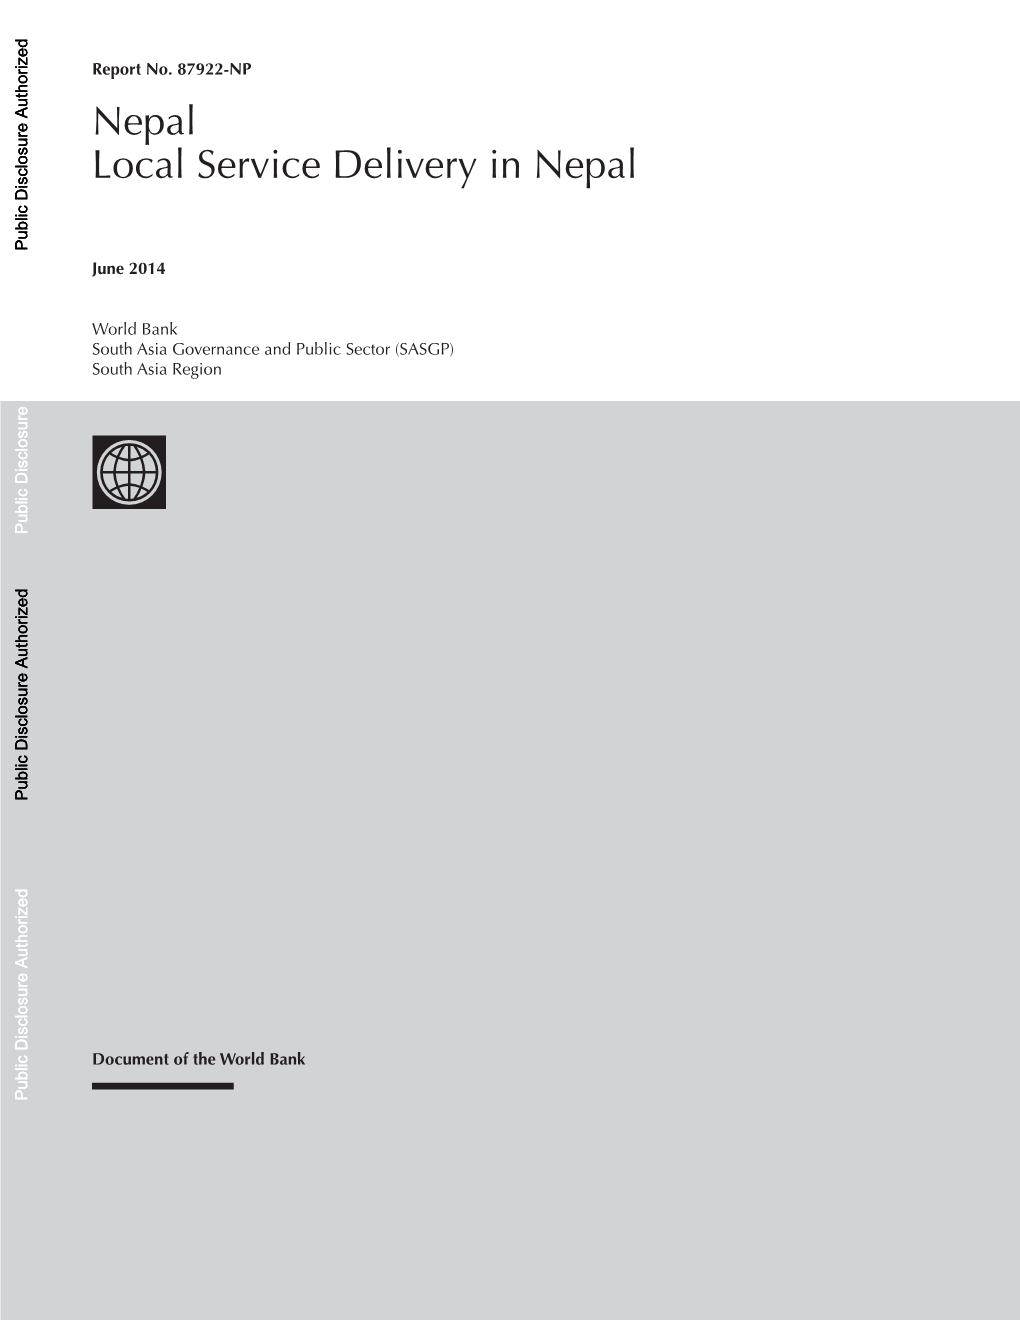 Local Service Delivery in Nepal